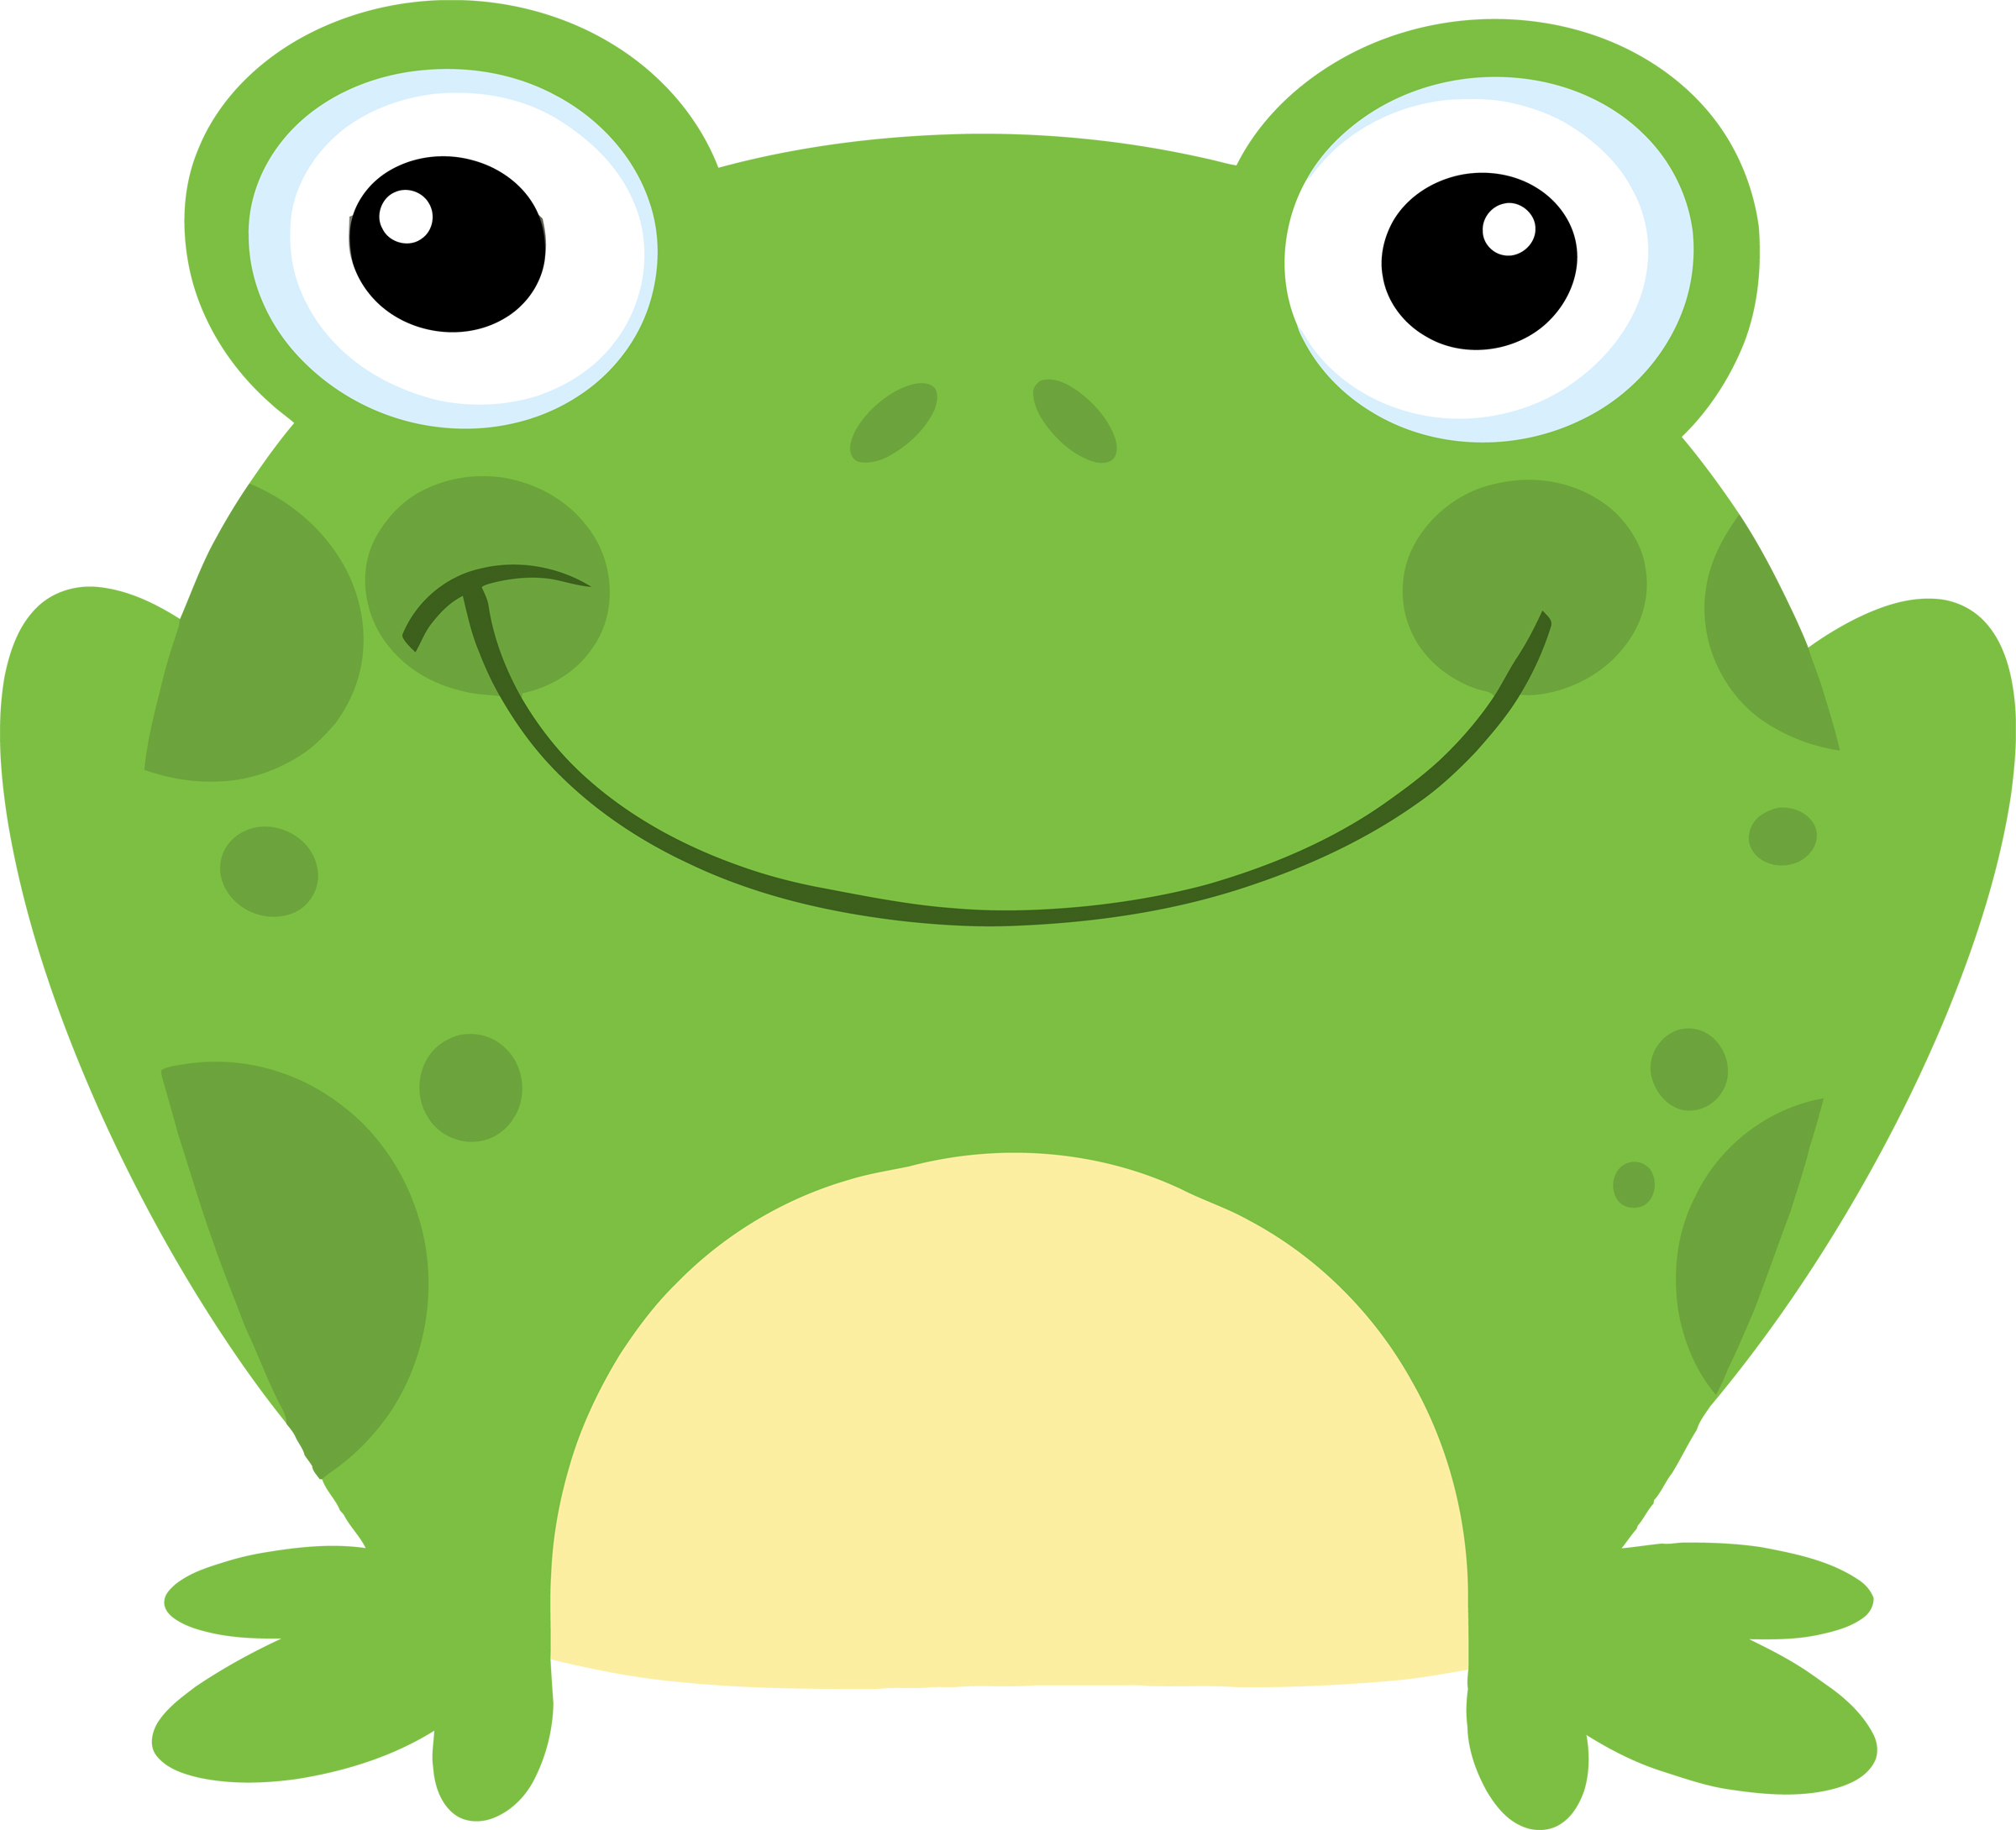 Frogs Cartoon Images - ClipArt Best